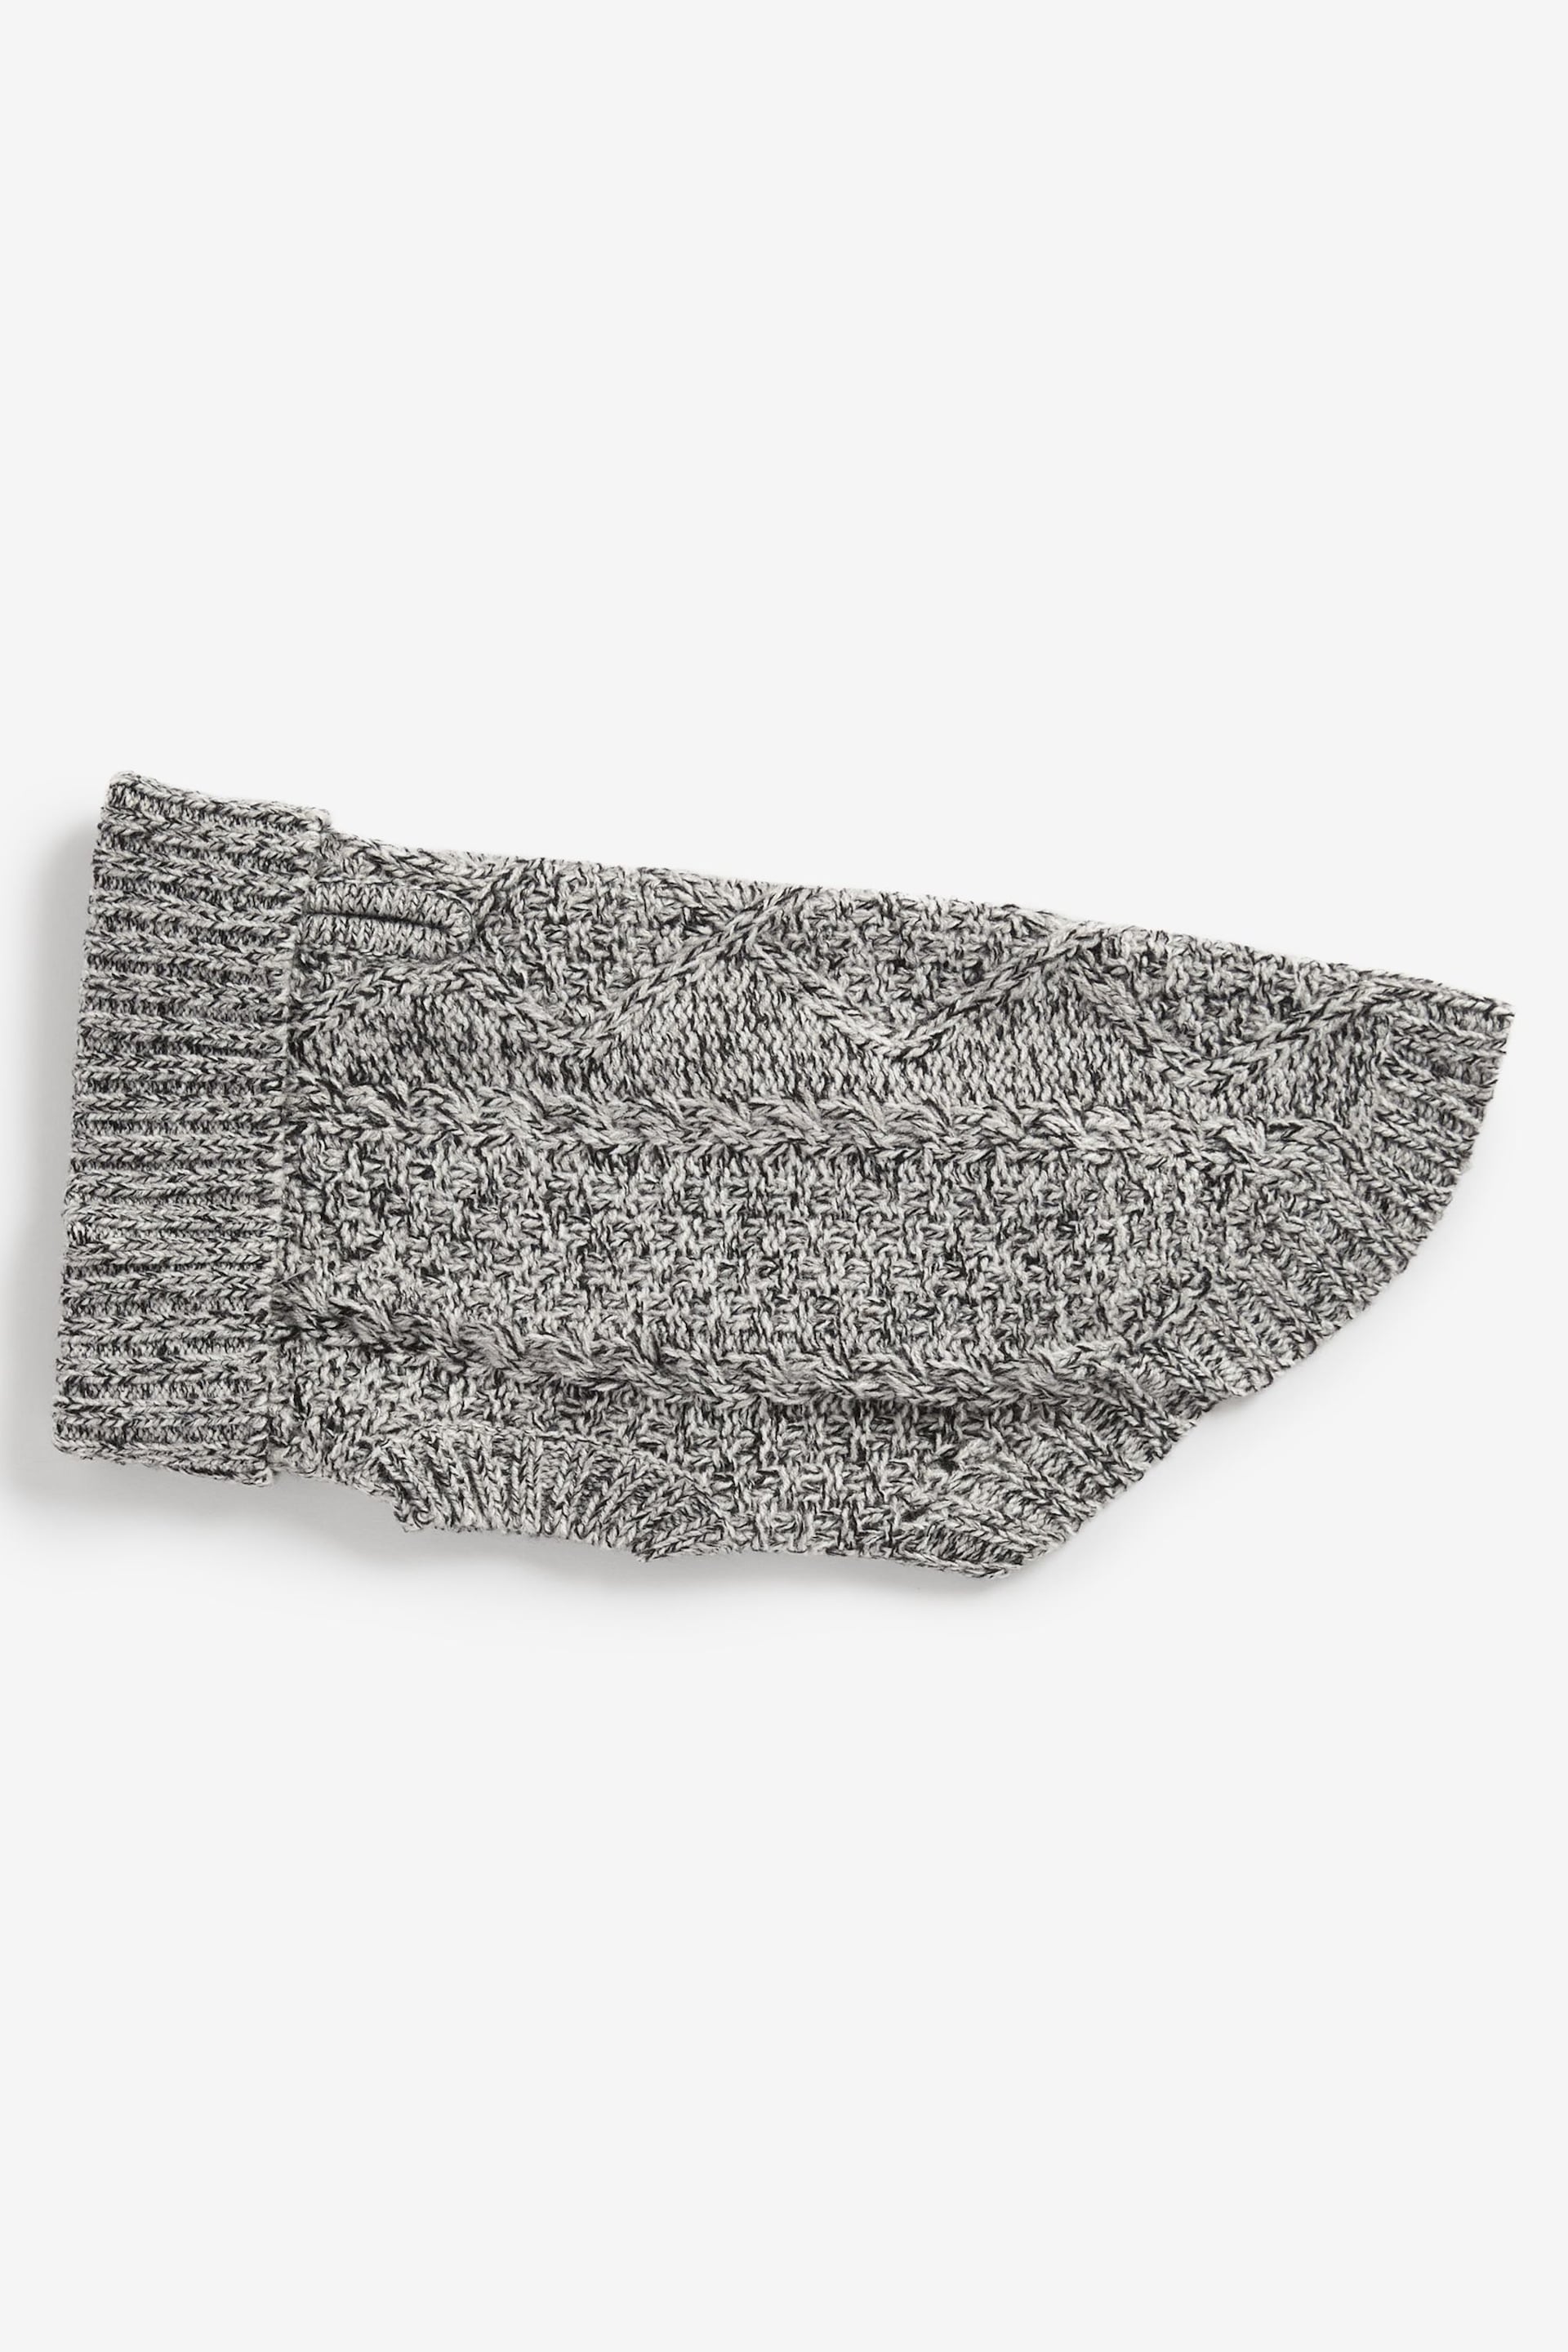 Charcoal Grey Cable Stitch Dog Jumper - Image 6 of 9